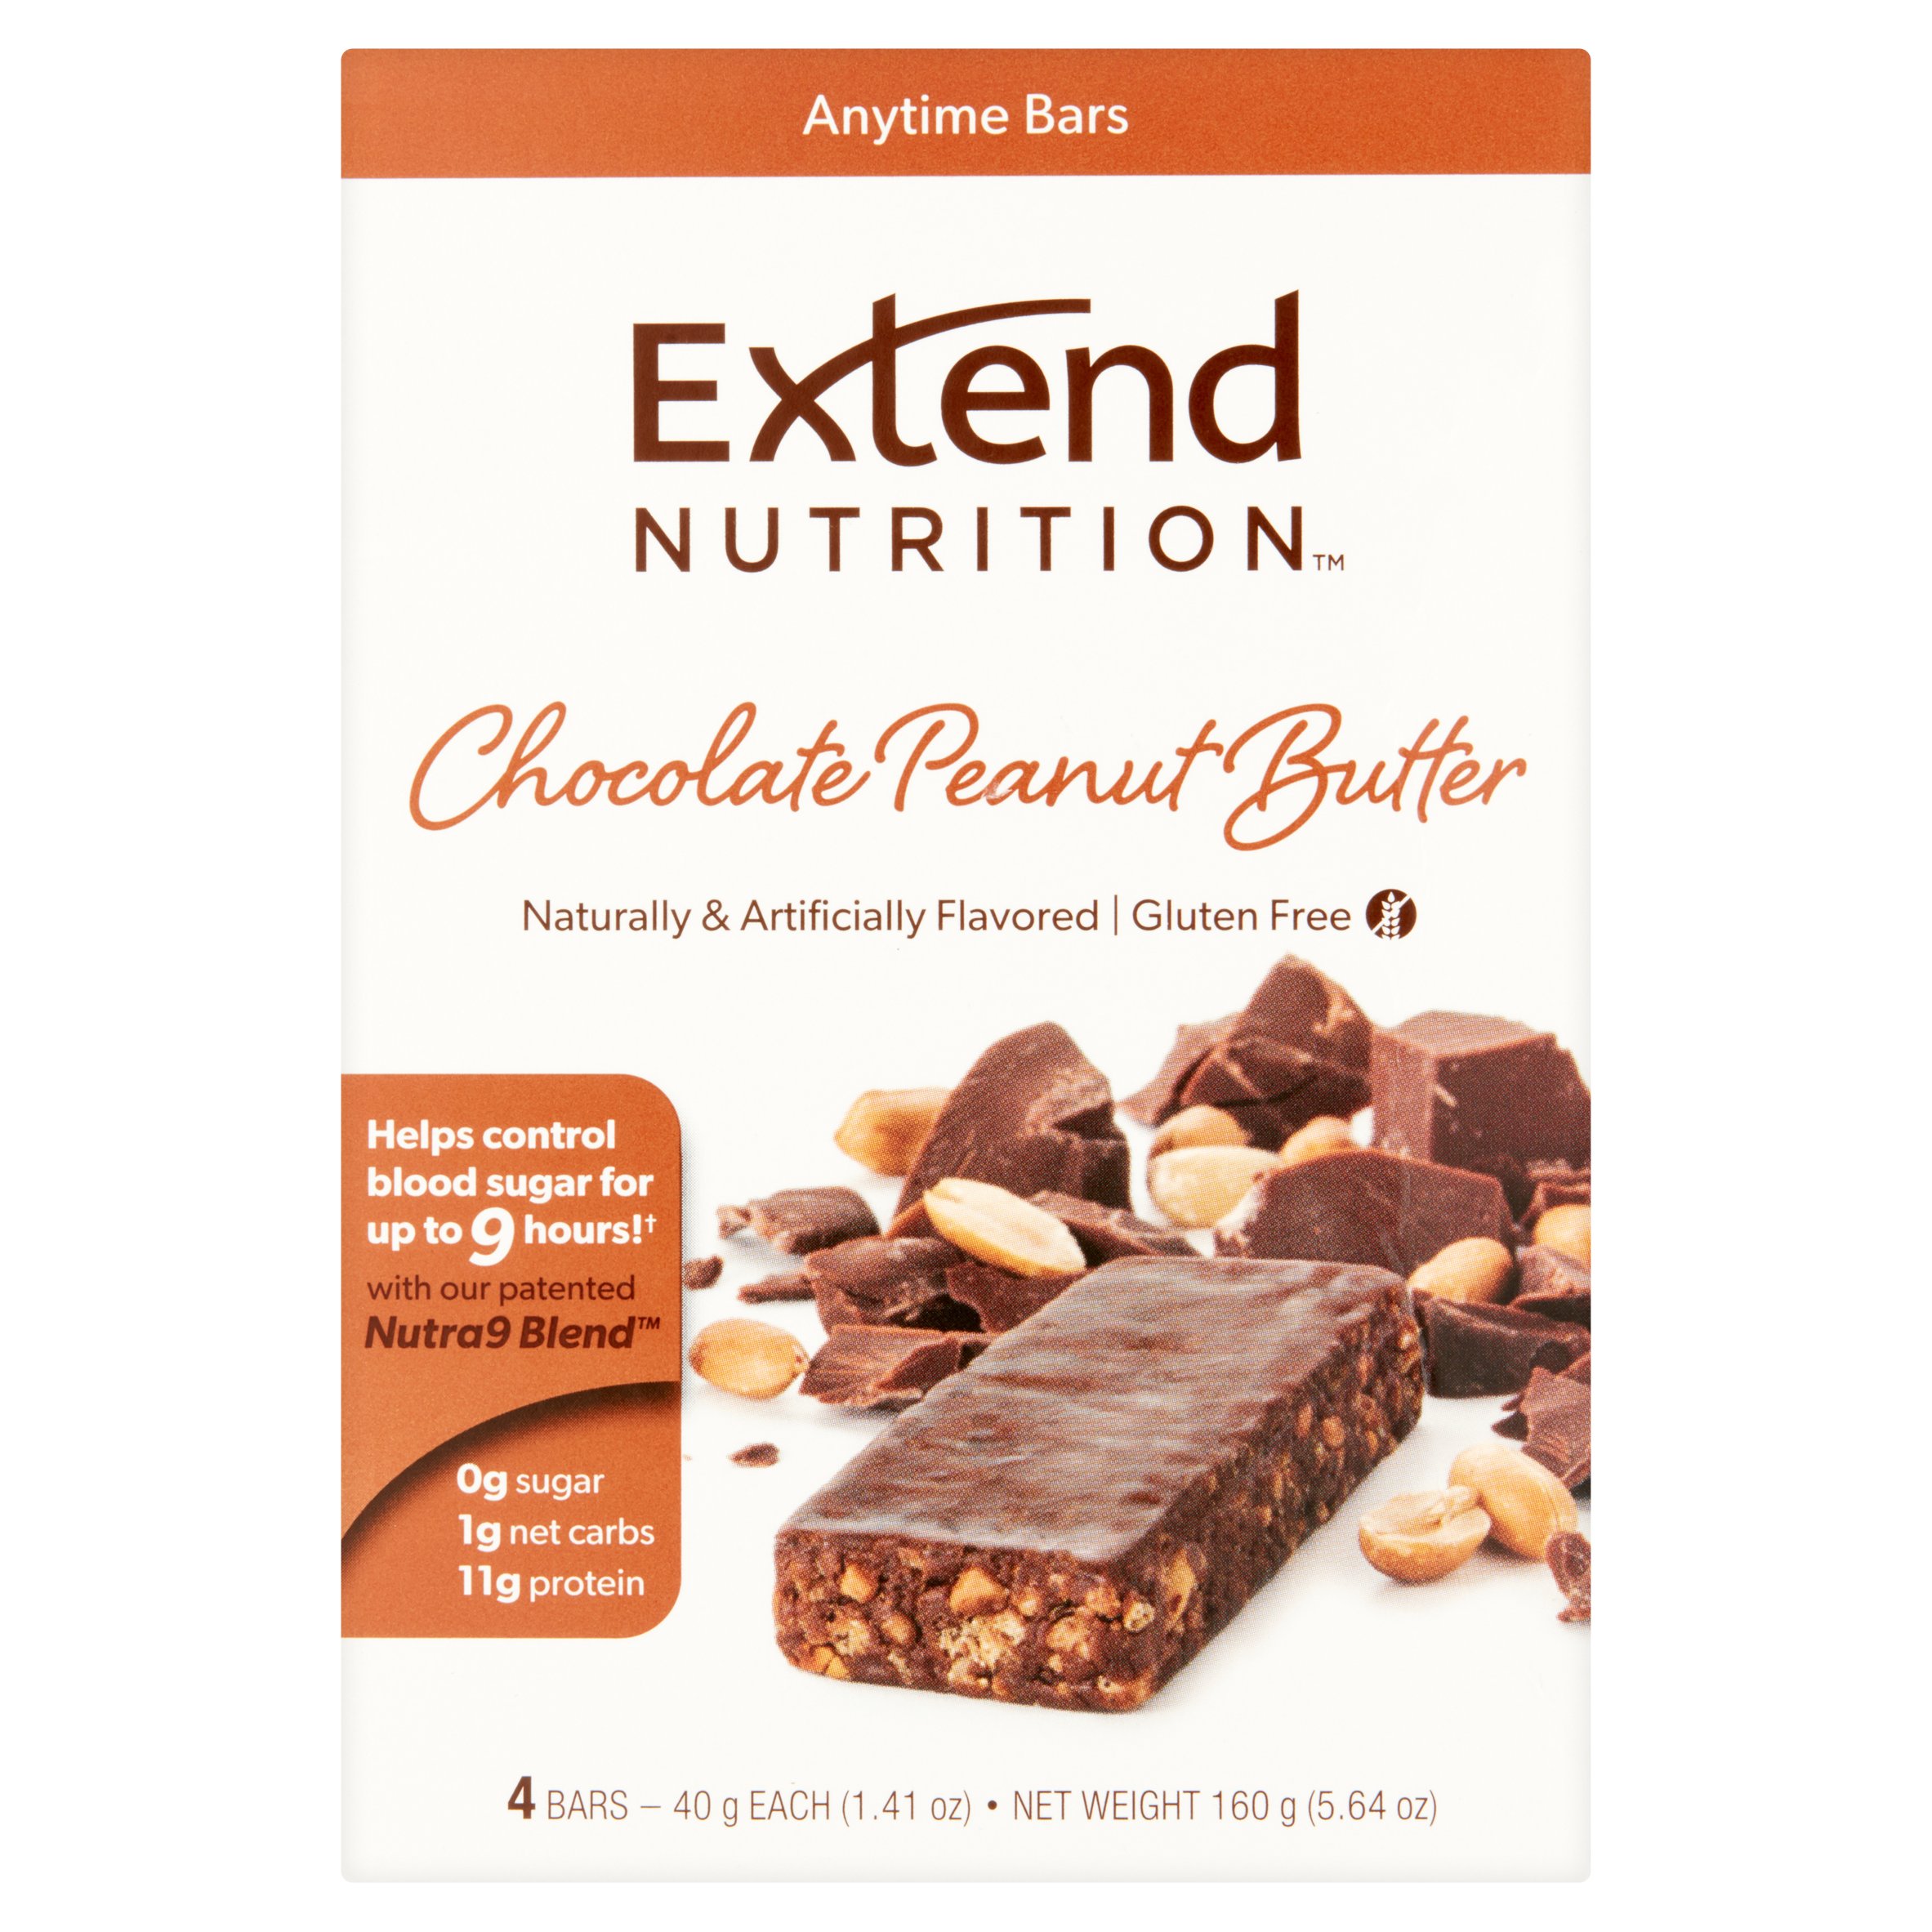 Extend Nutrition Chocolate Peanut Butter Bars, 4 Count - image 1 of 6